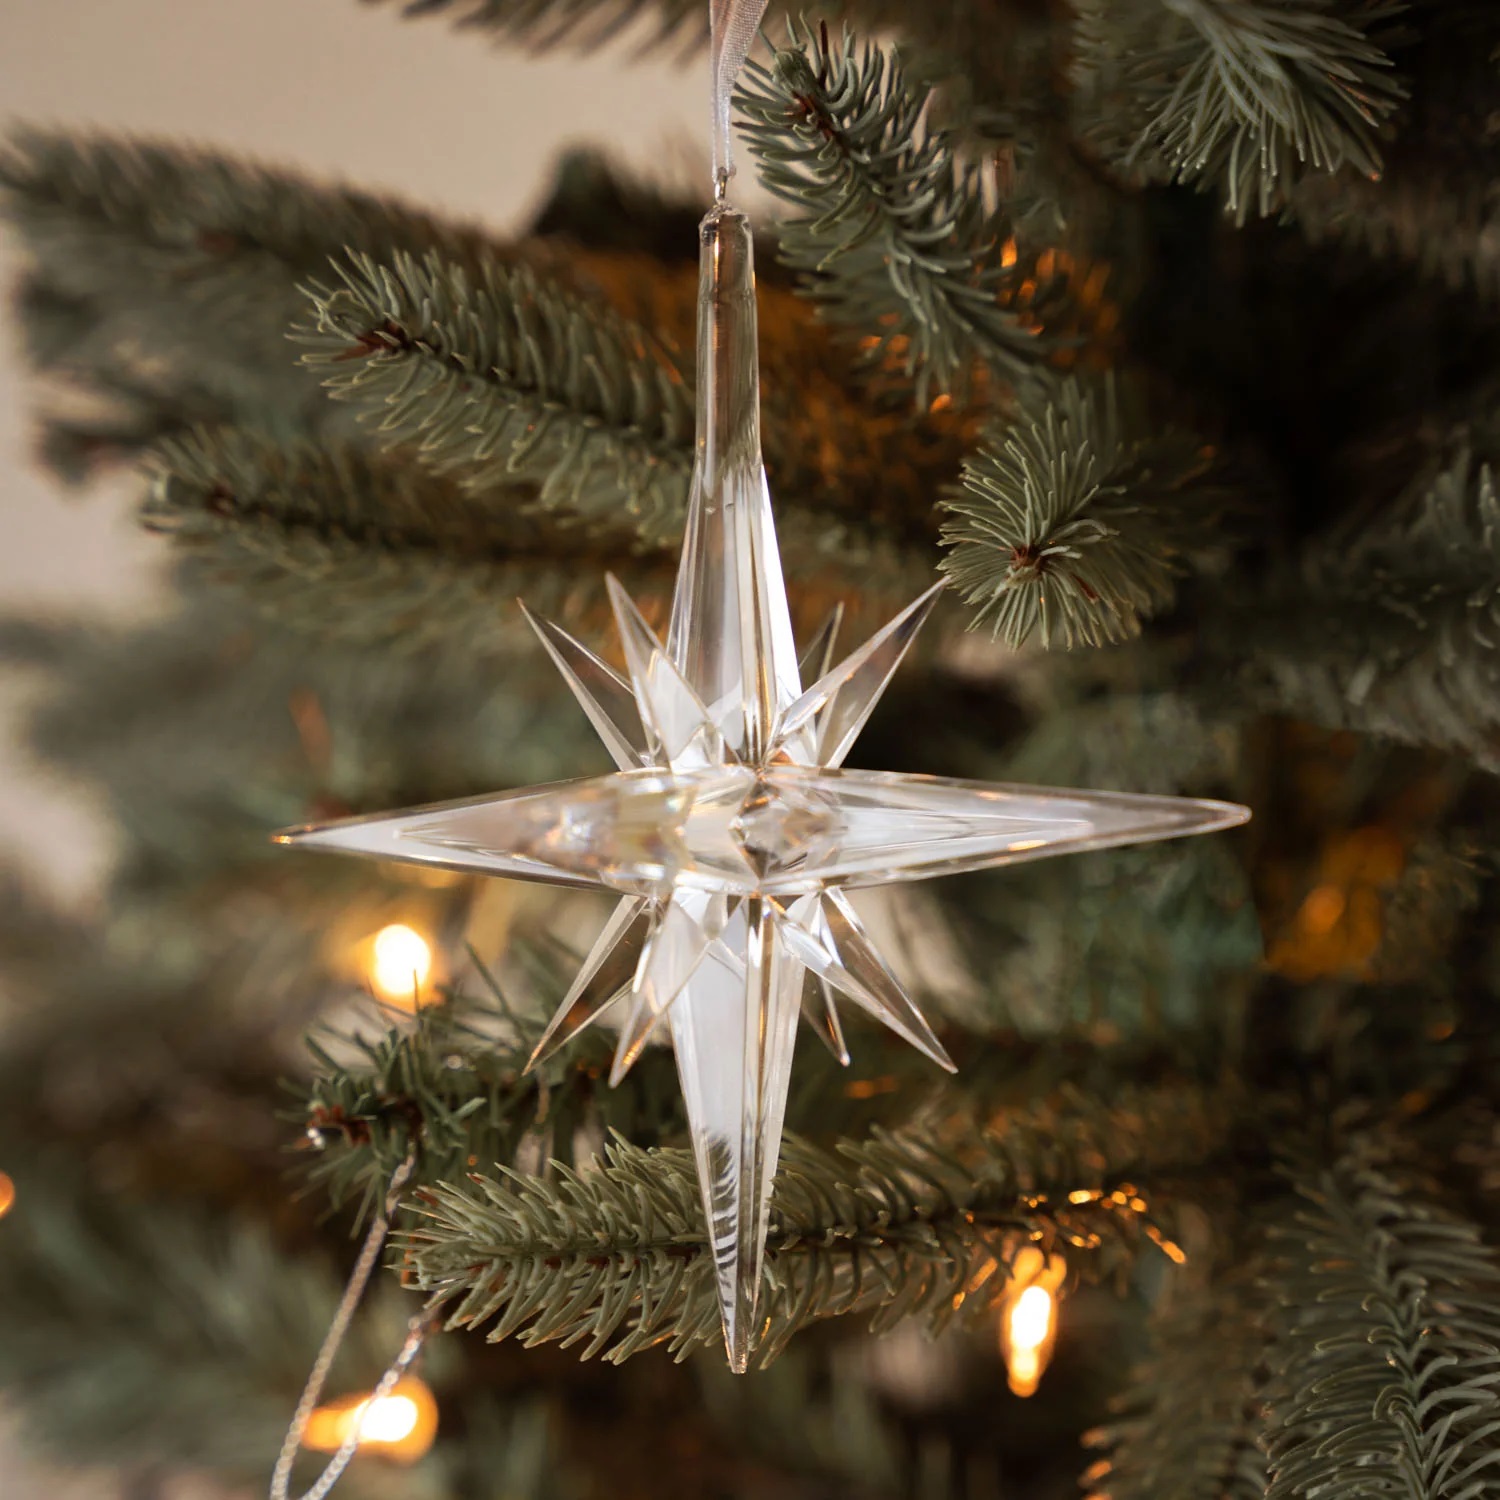 50 x Star Hanging Ornaments - 9 x Large 41 x Small